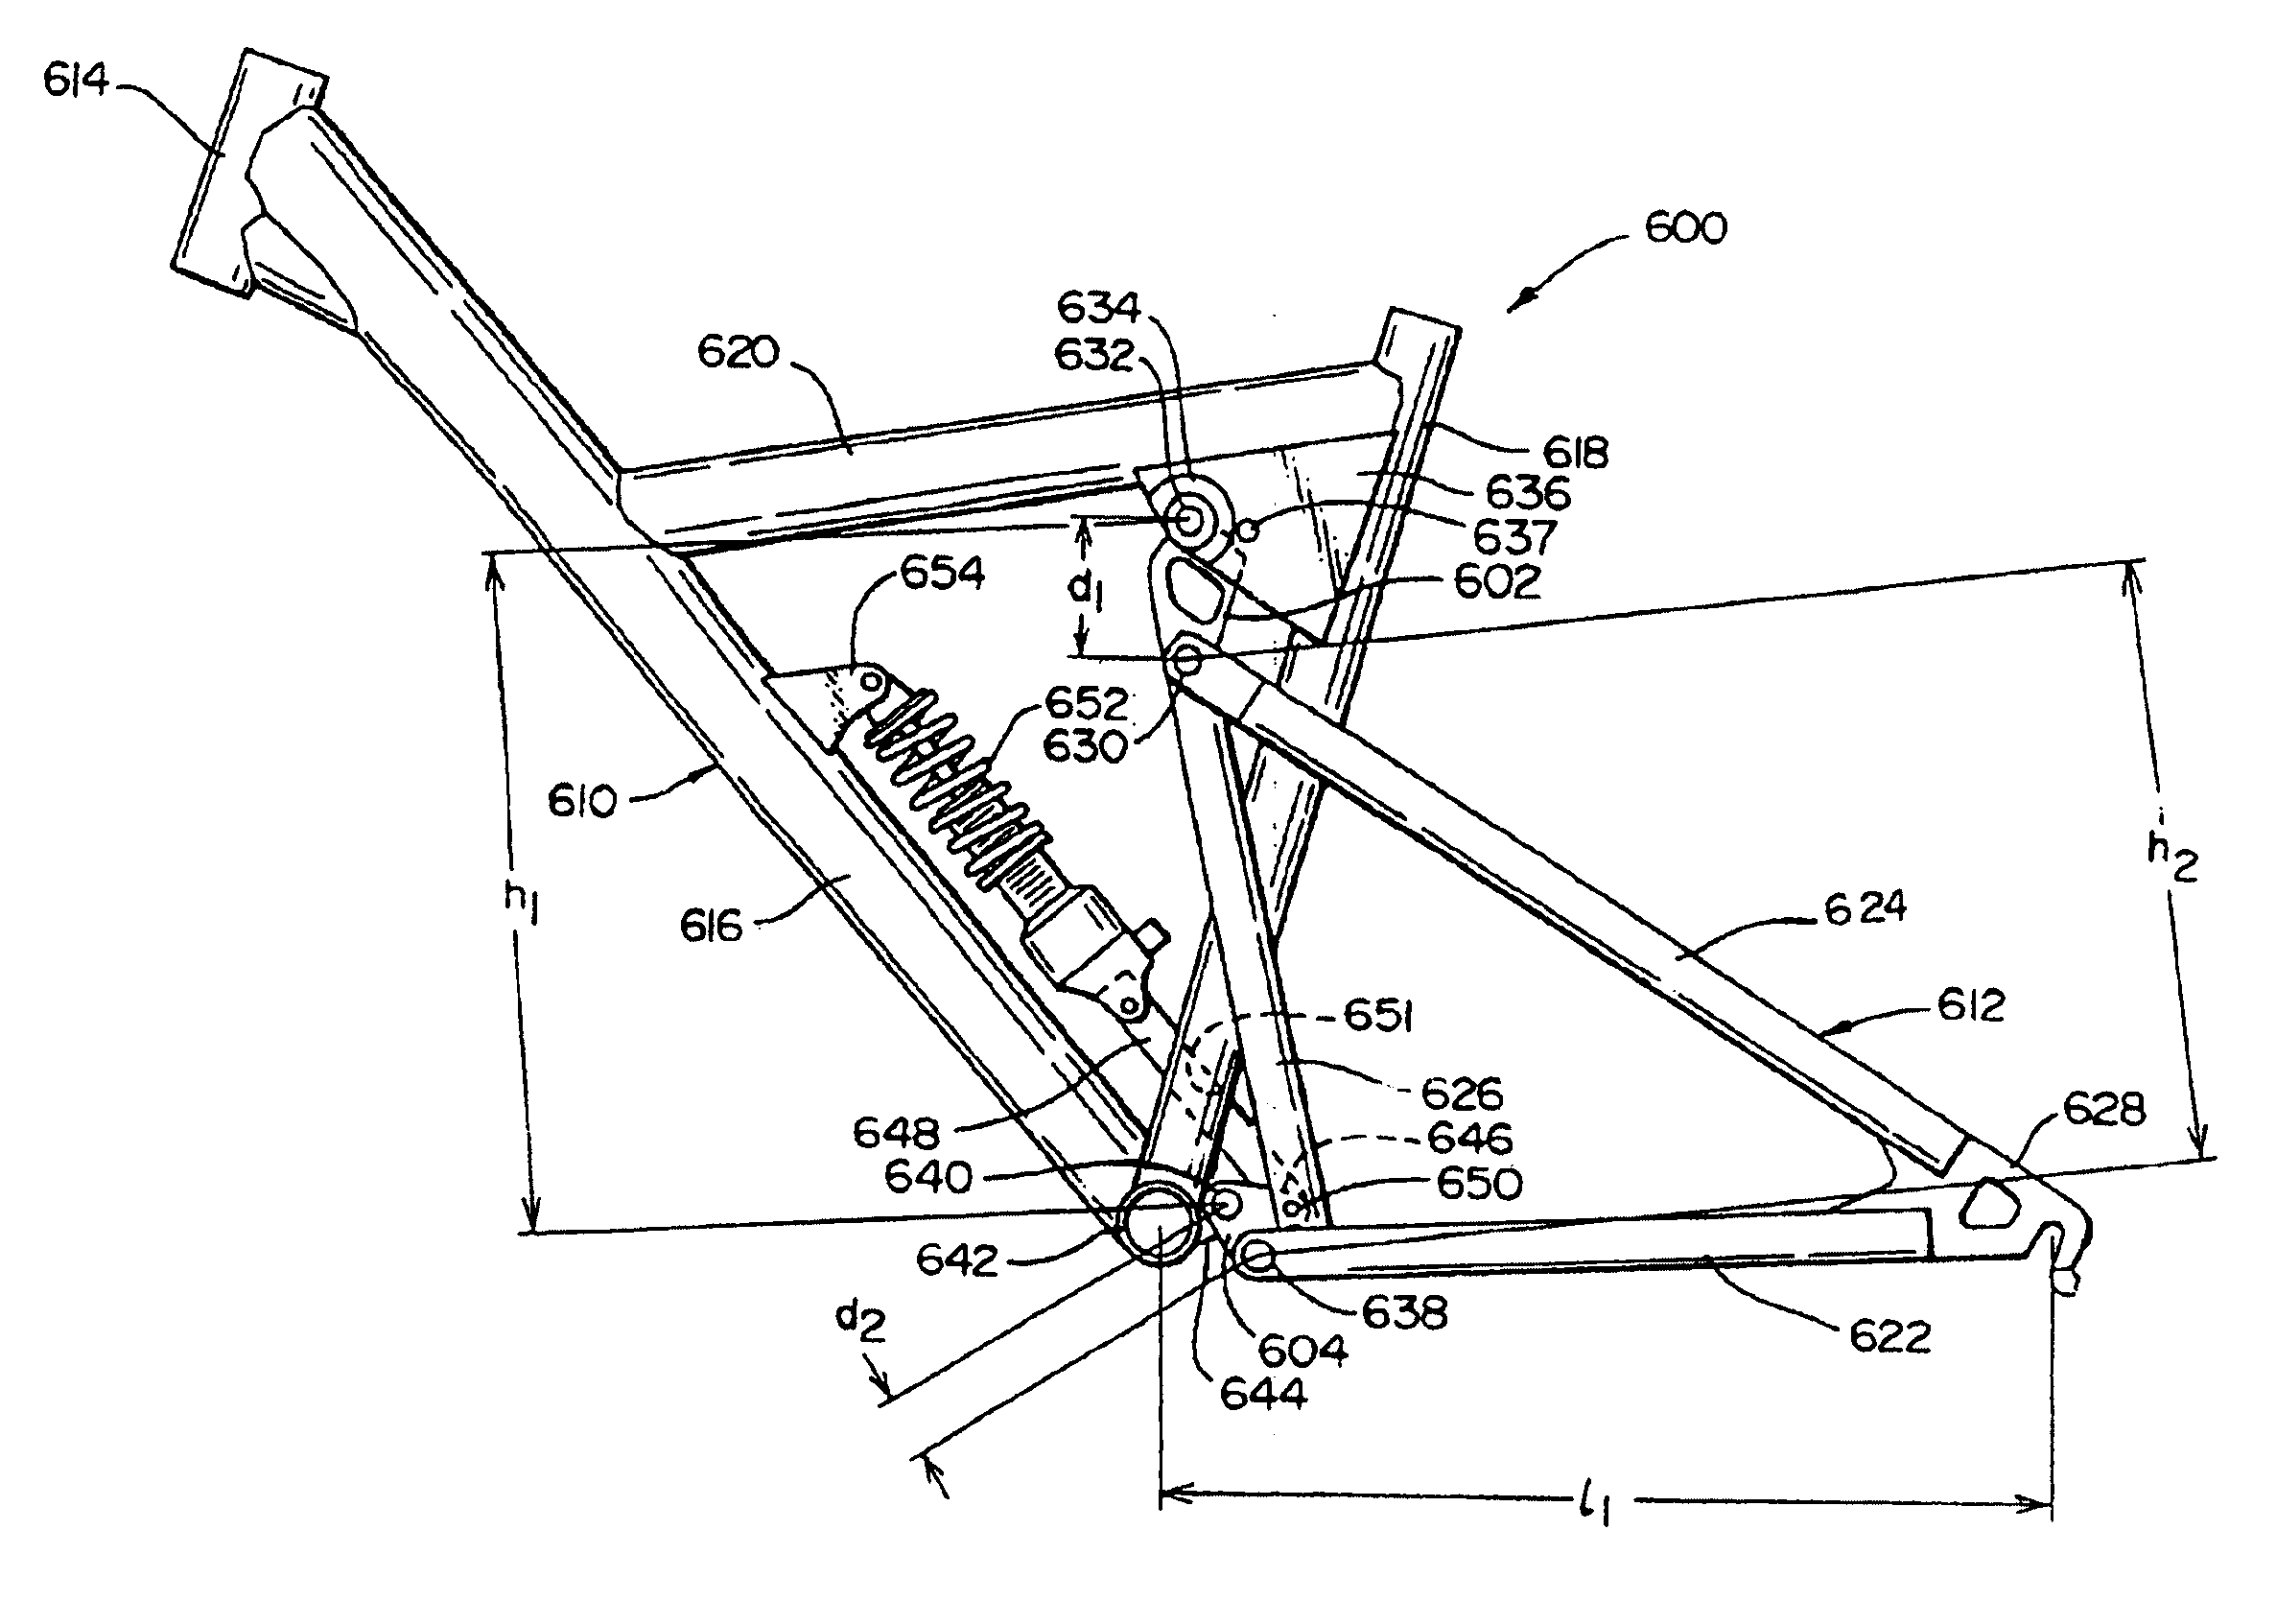 Bicycle wheel travel path for selectively applying chainstay lengthening effect and apparatus for providing same